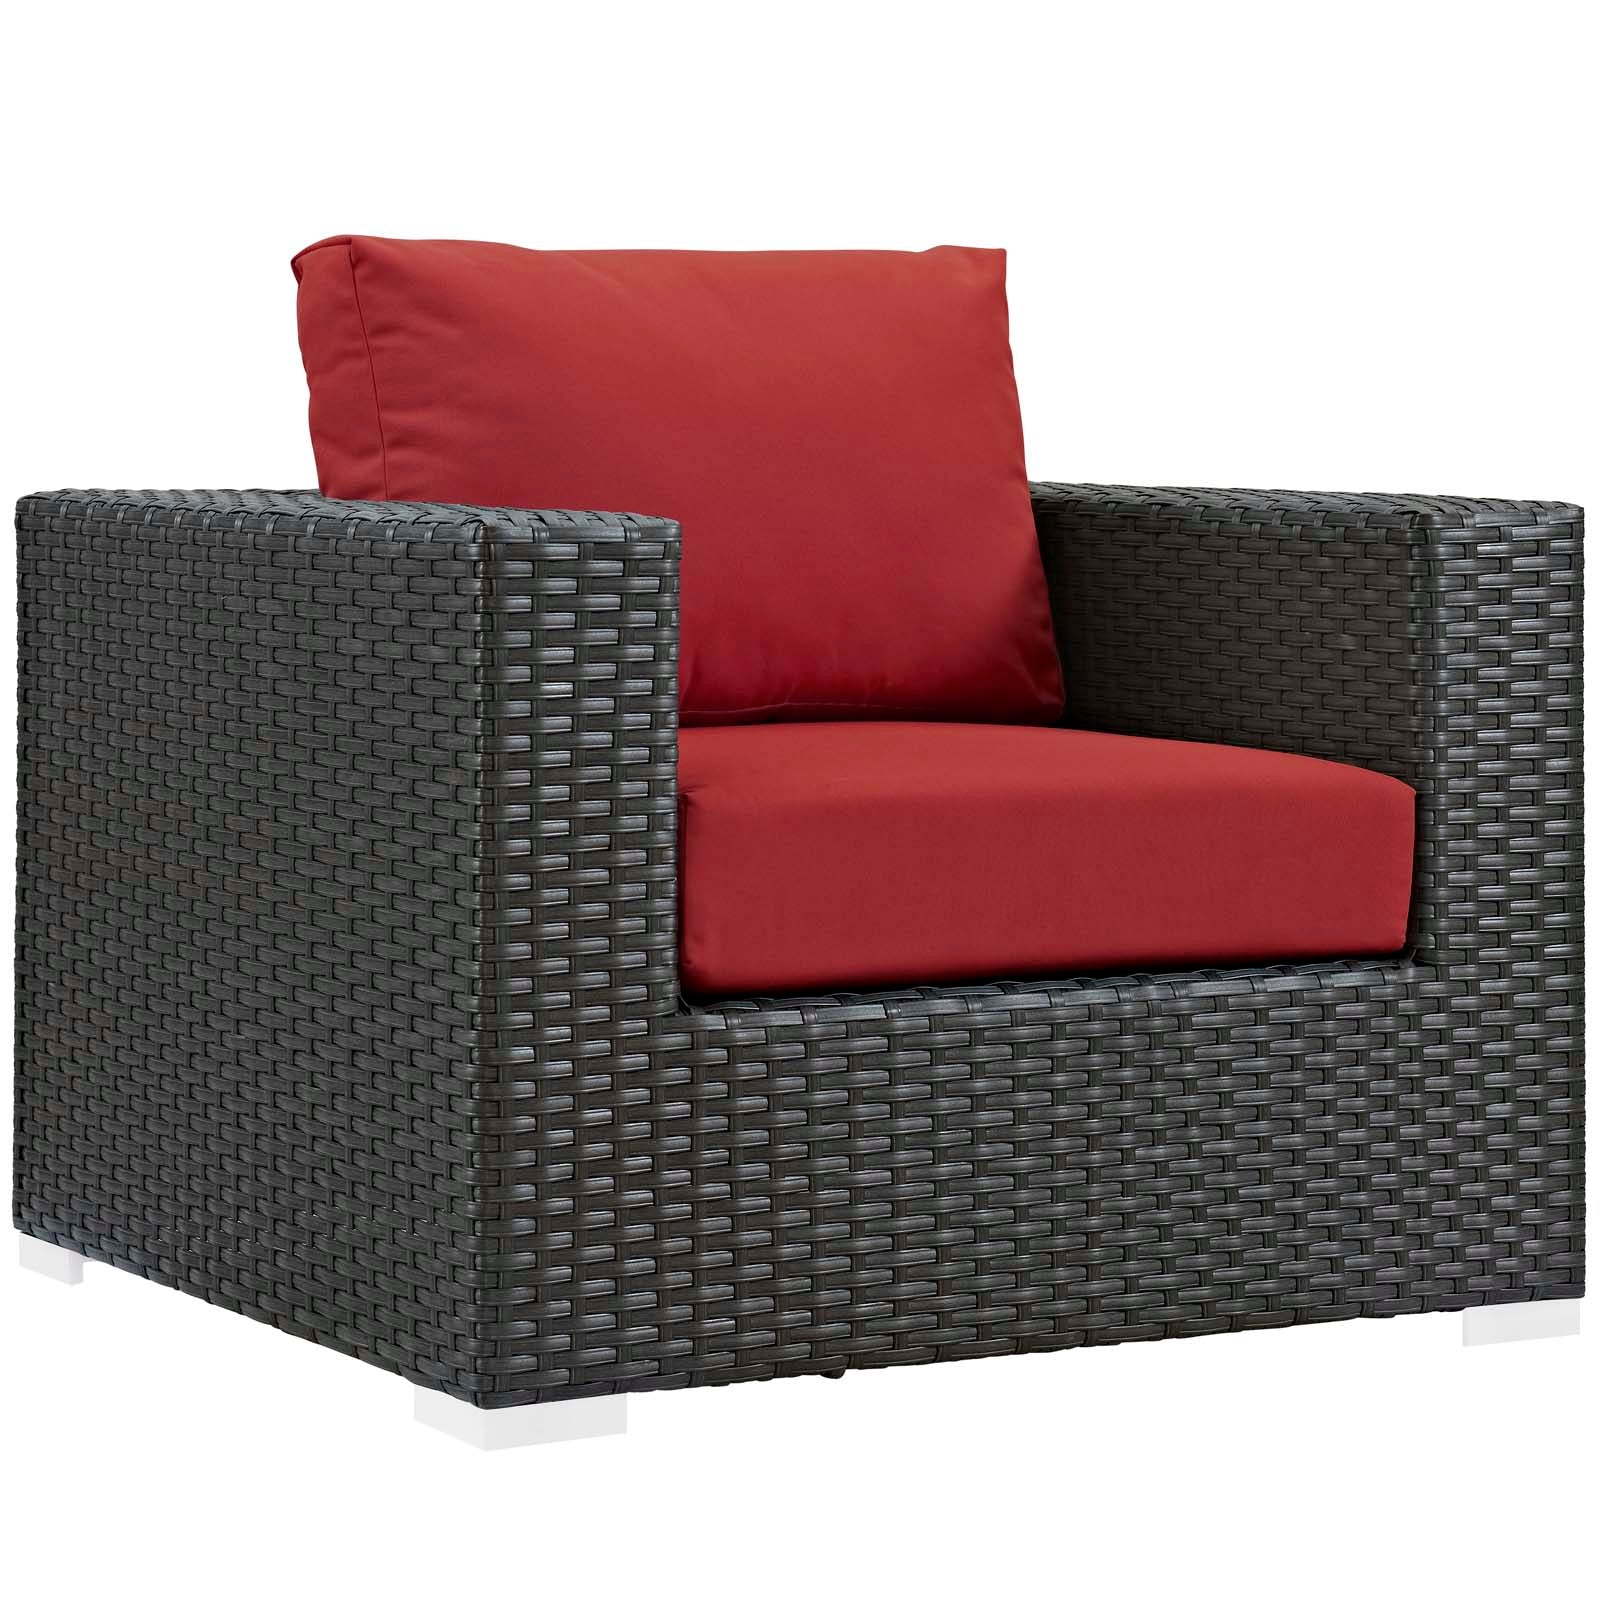 Modway Outdoor Conversation Sets - Sojourn 3 Piece Outdoor Patio Sunbrella Sectional Set Canvas Red